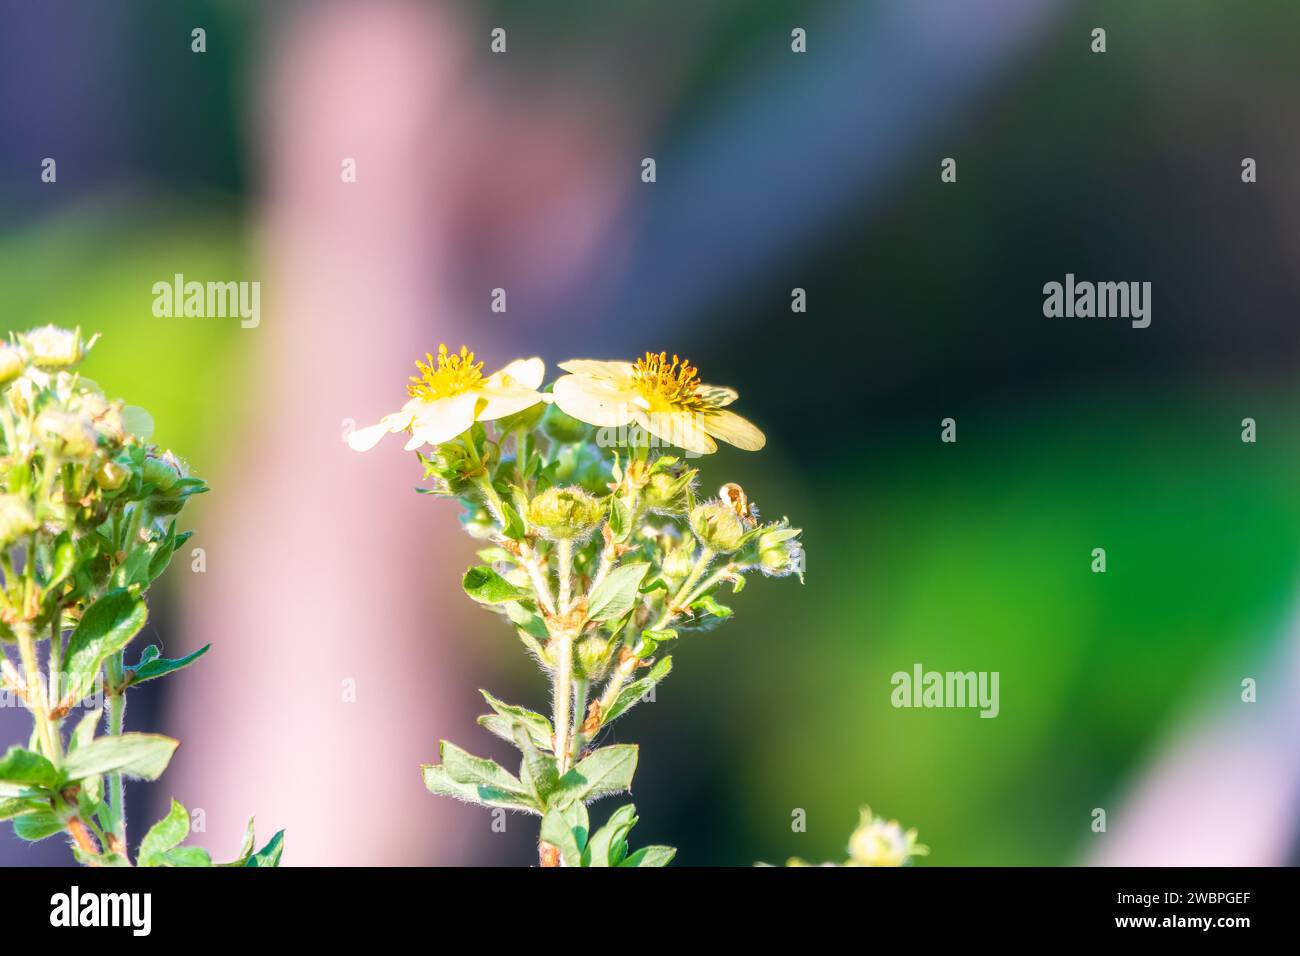 Beautiful close-up of a potentilla. Cute bush with delicate yellow flowers Stock Photo